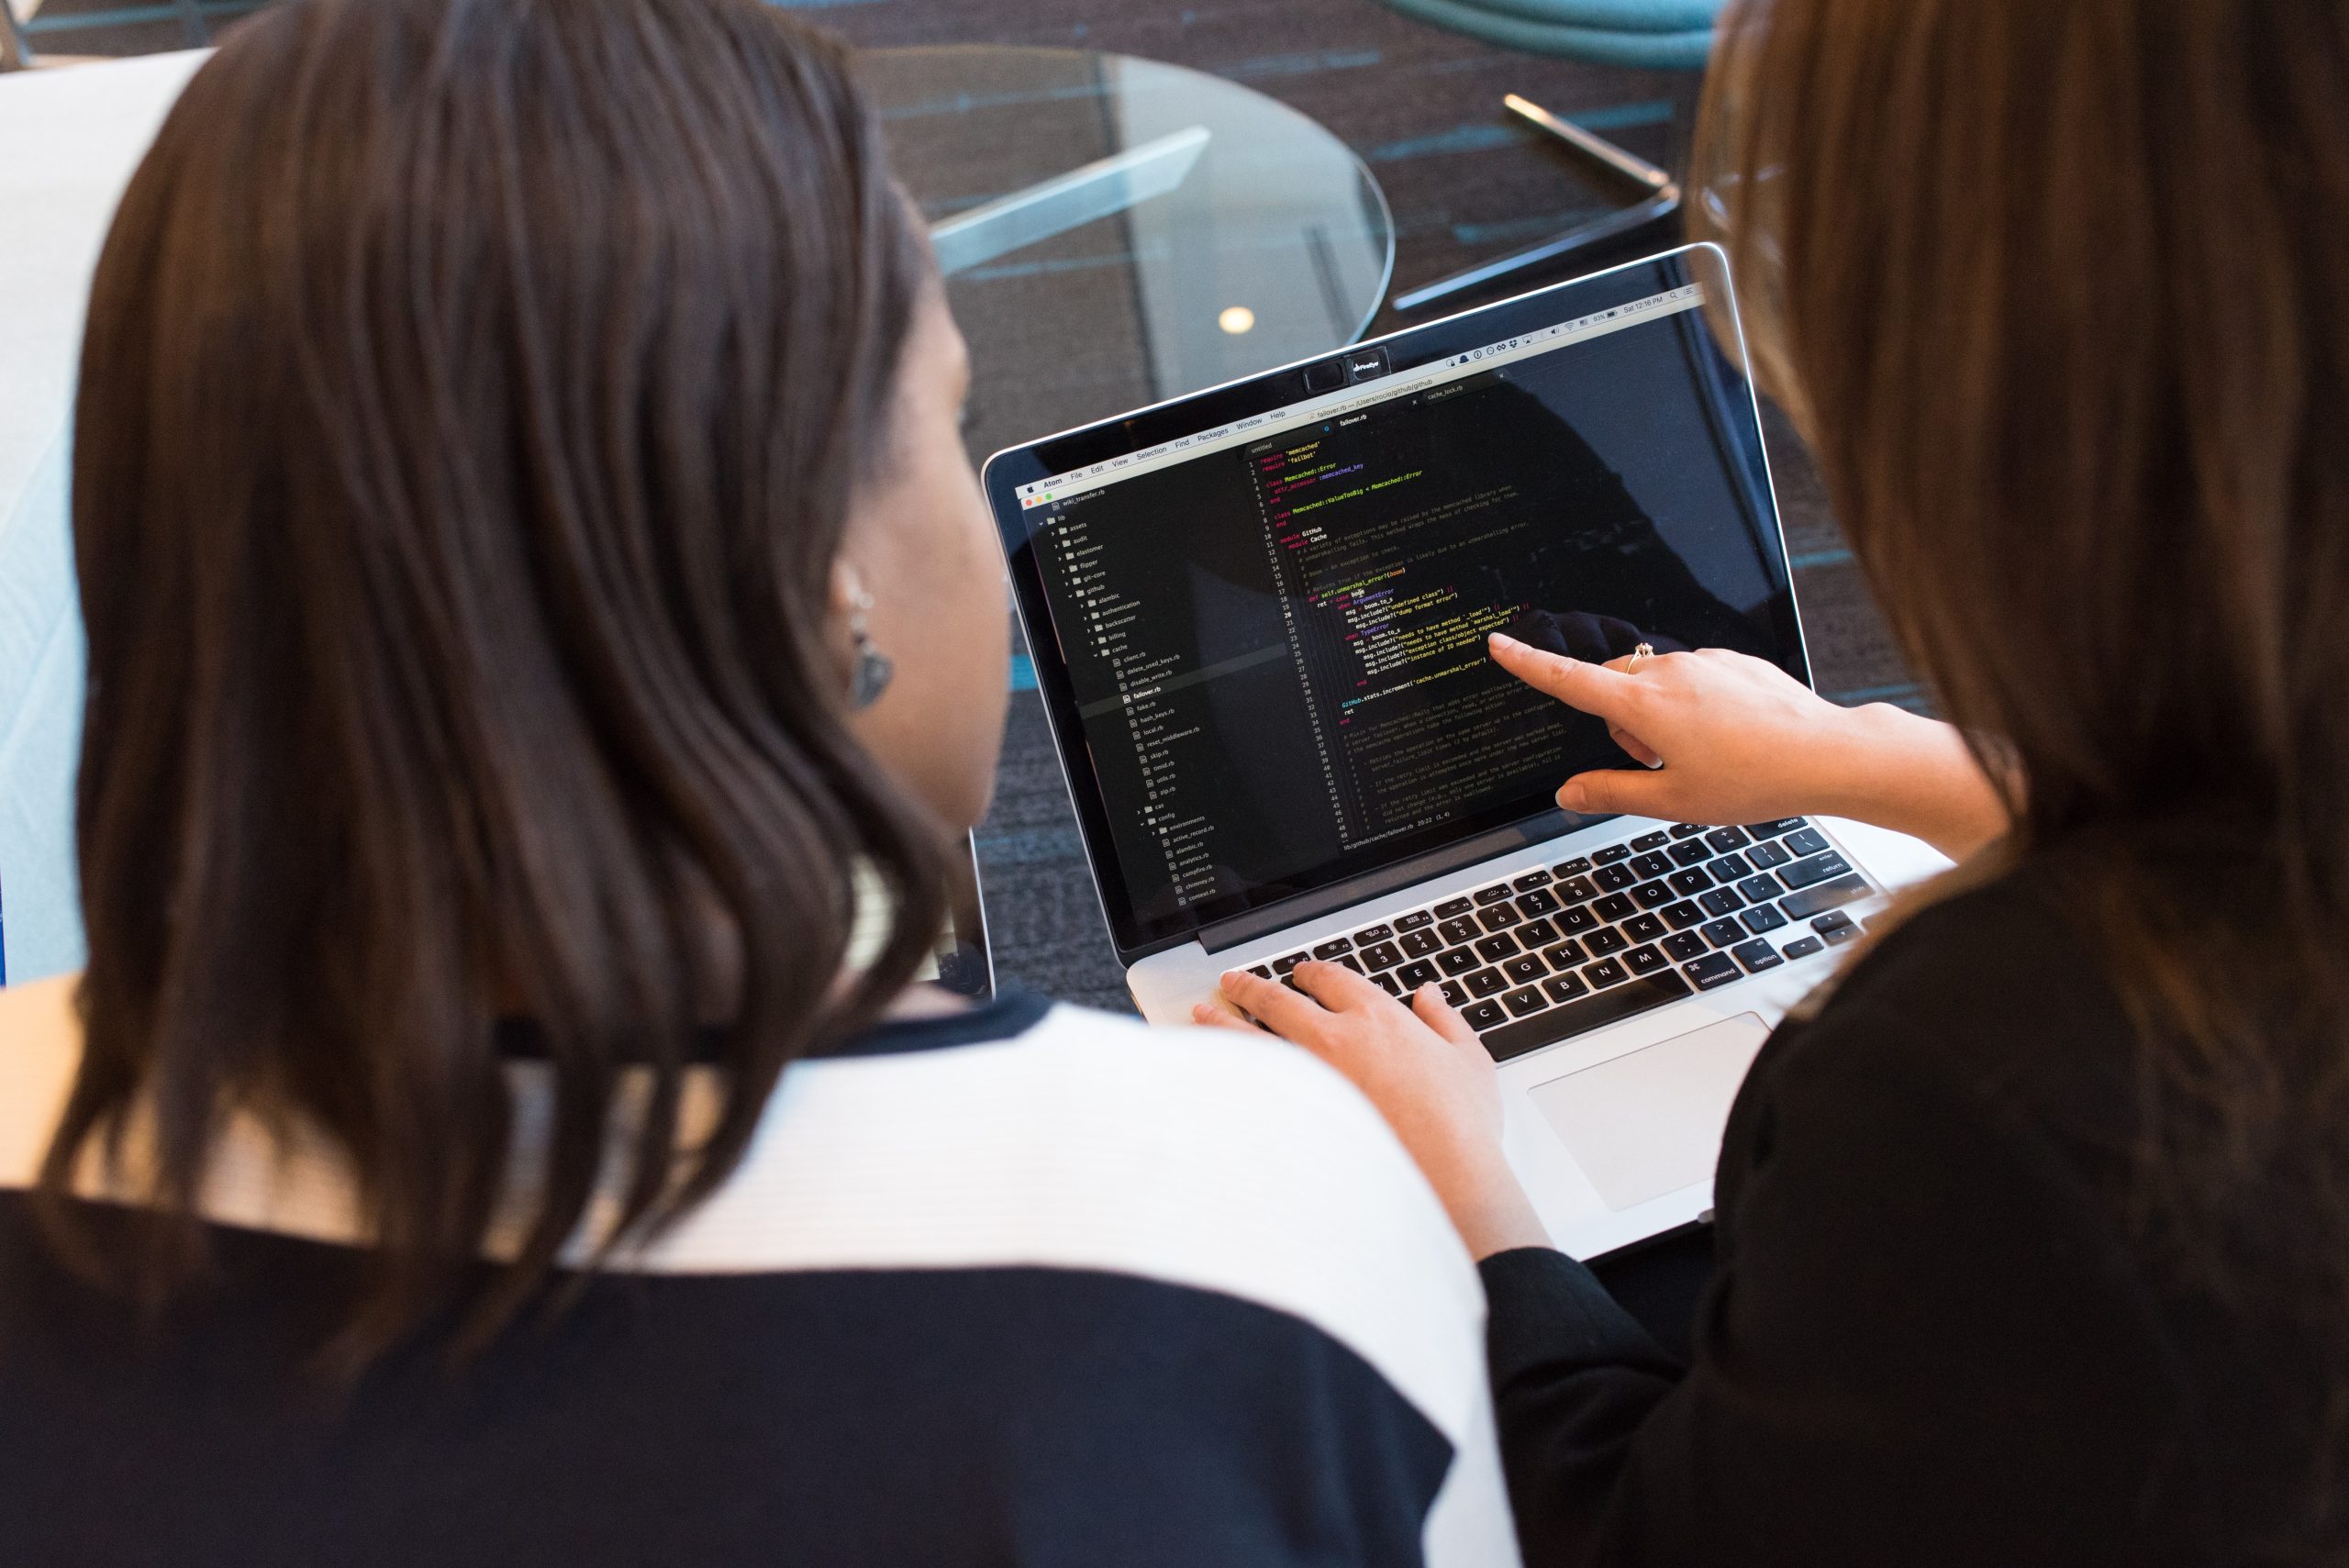 Why we chose to focus on helping women get into coding